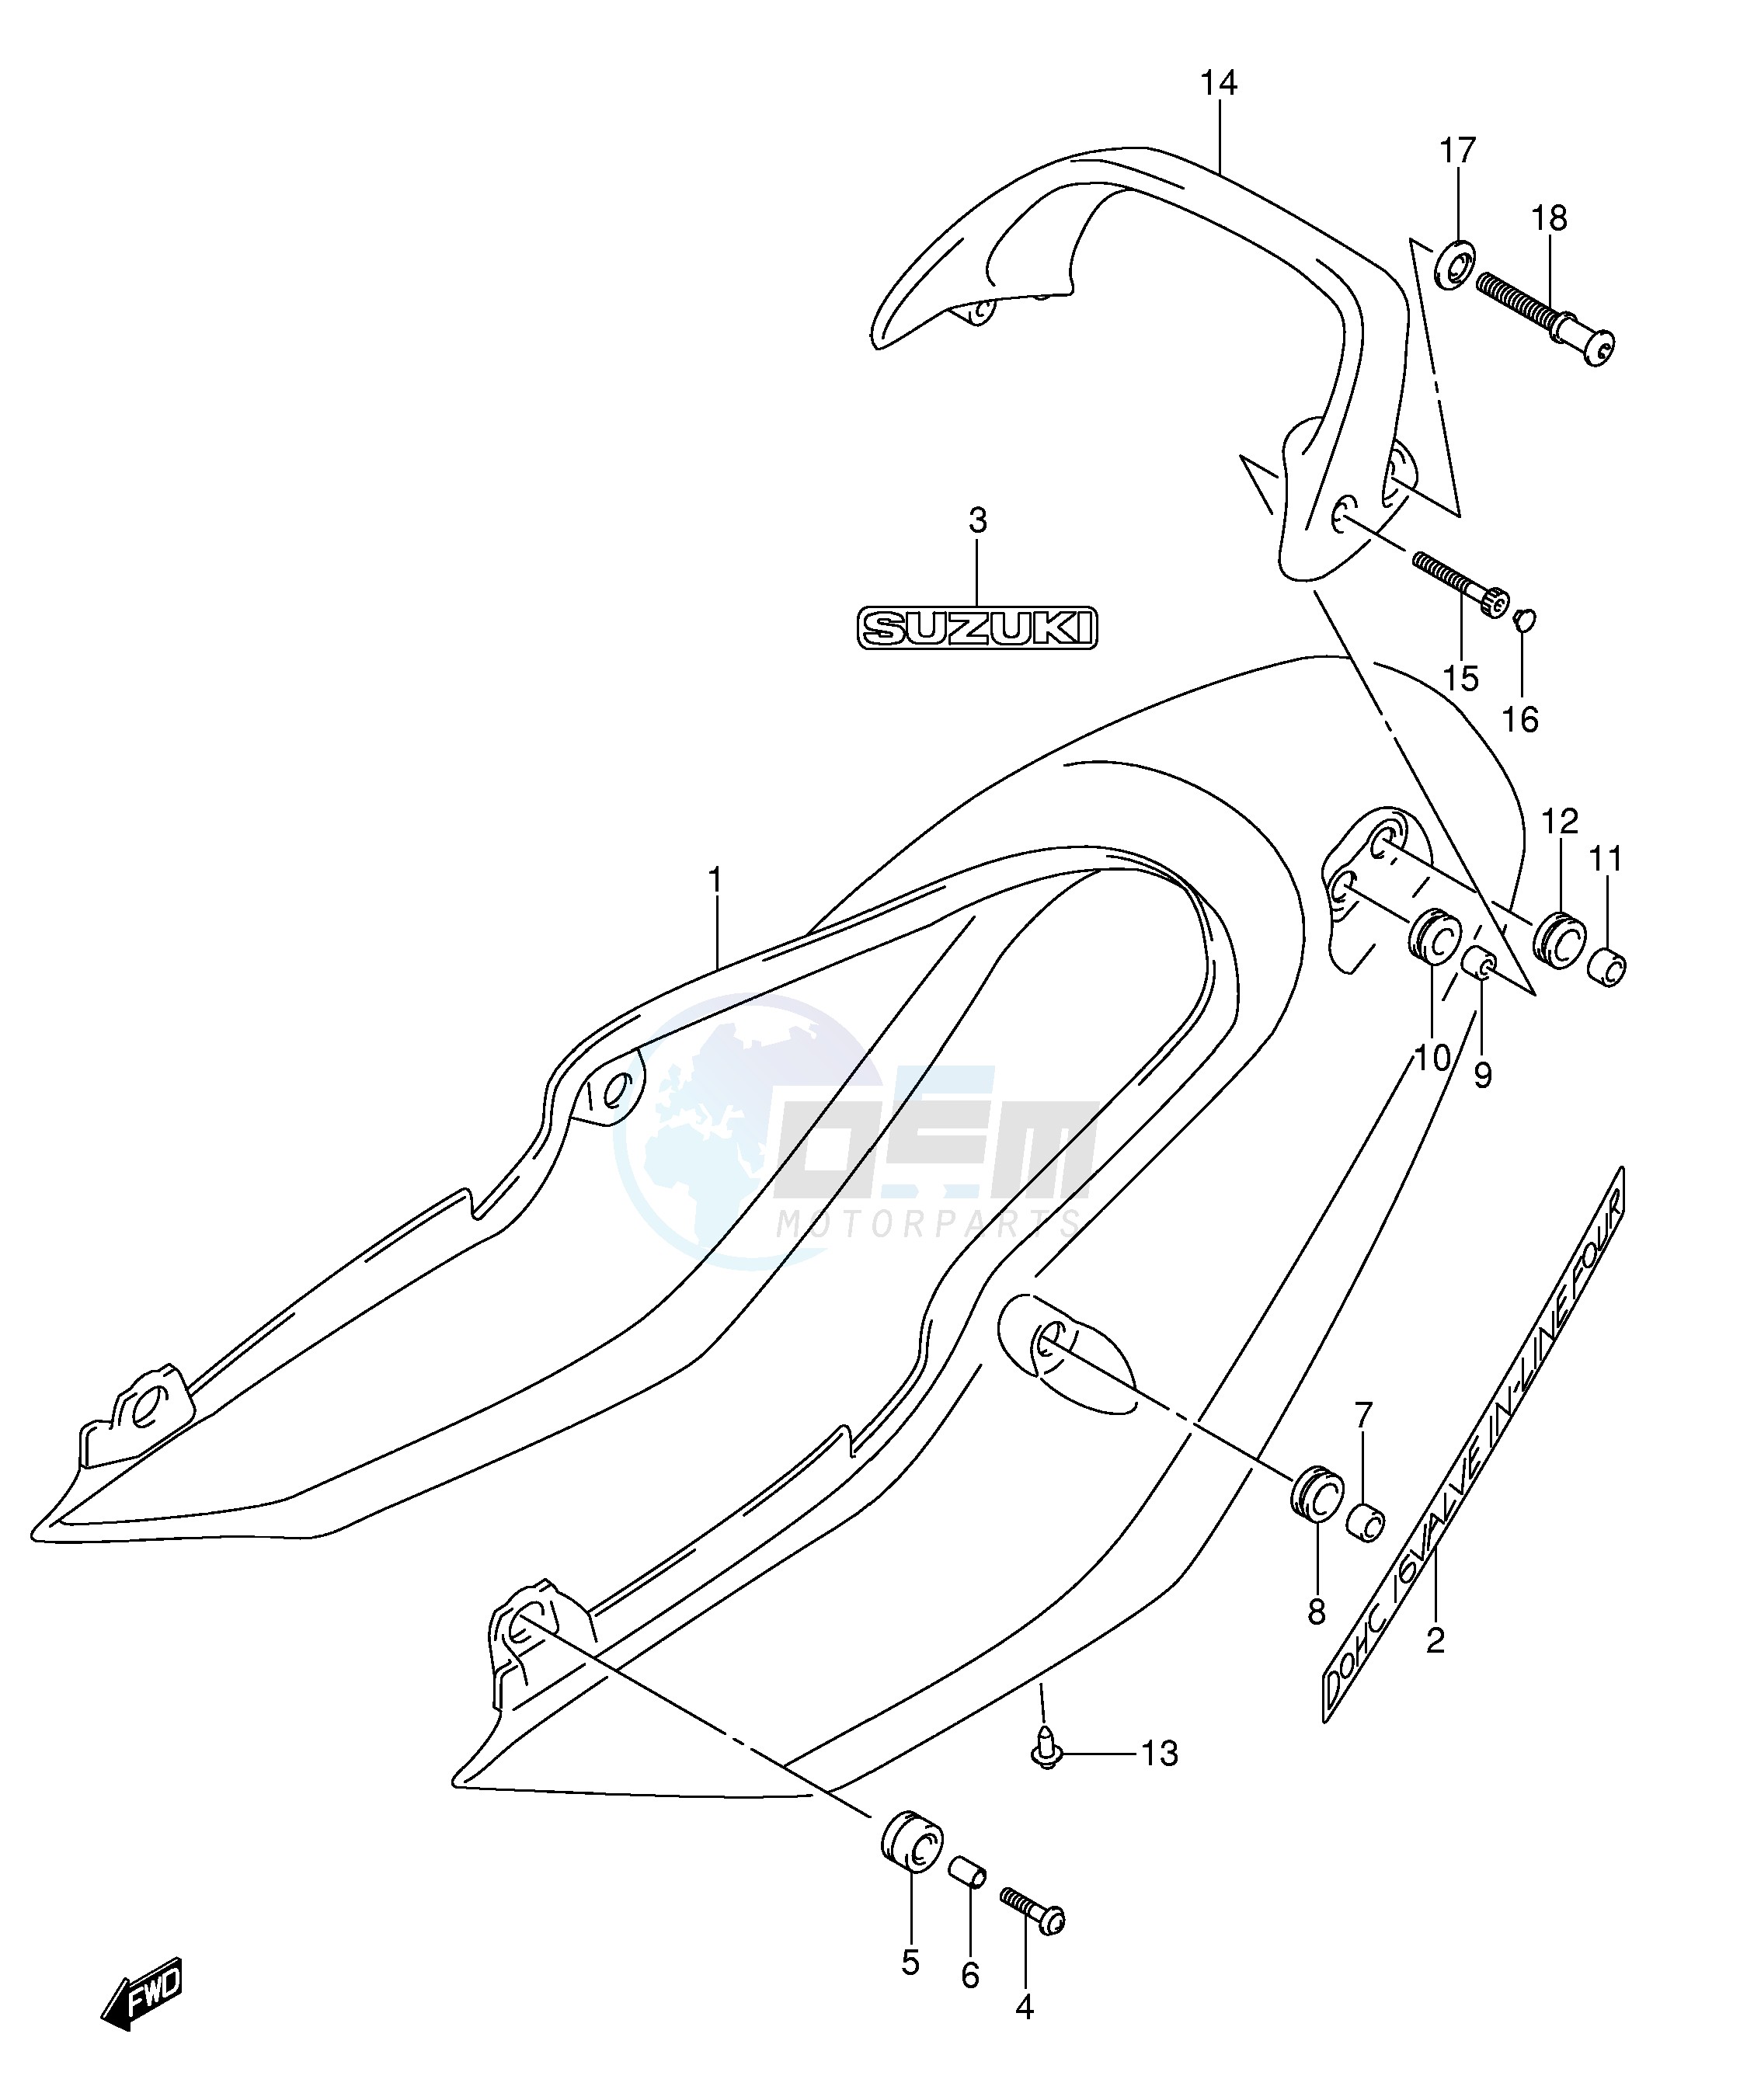 SEAT TAIL COVER (GSF1200SK3) blueprint